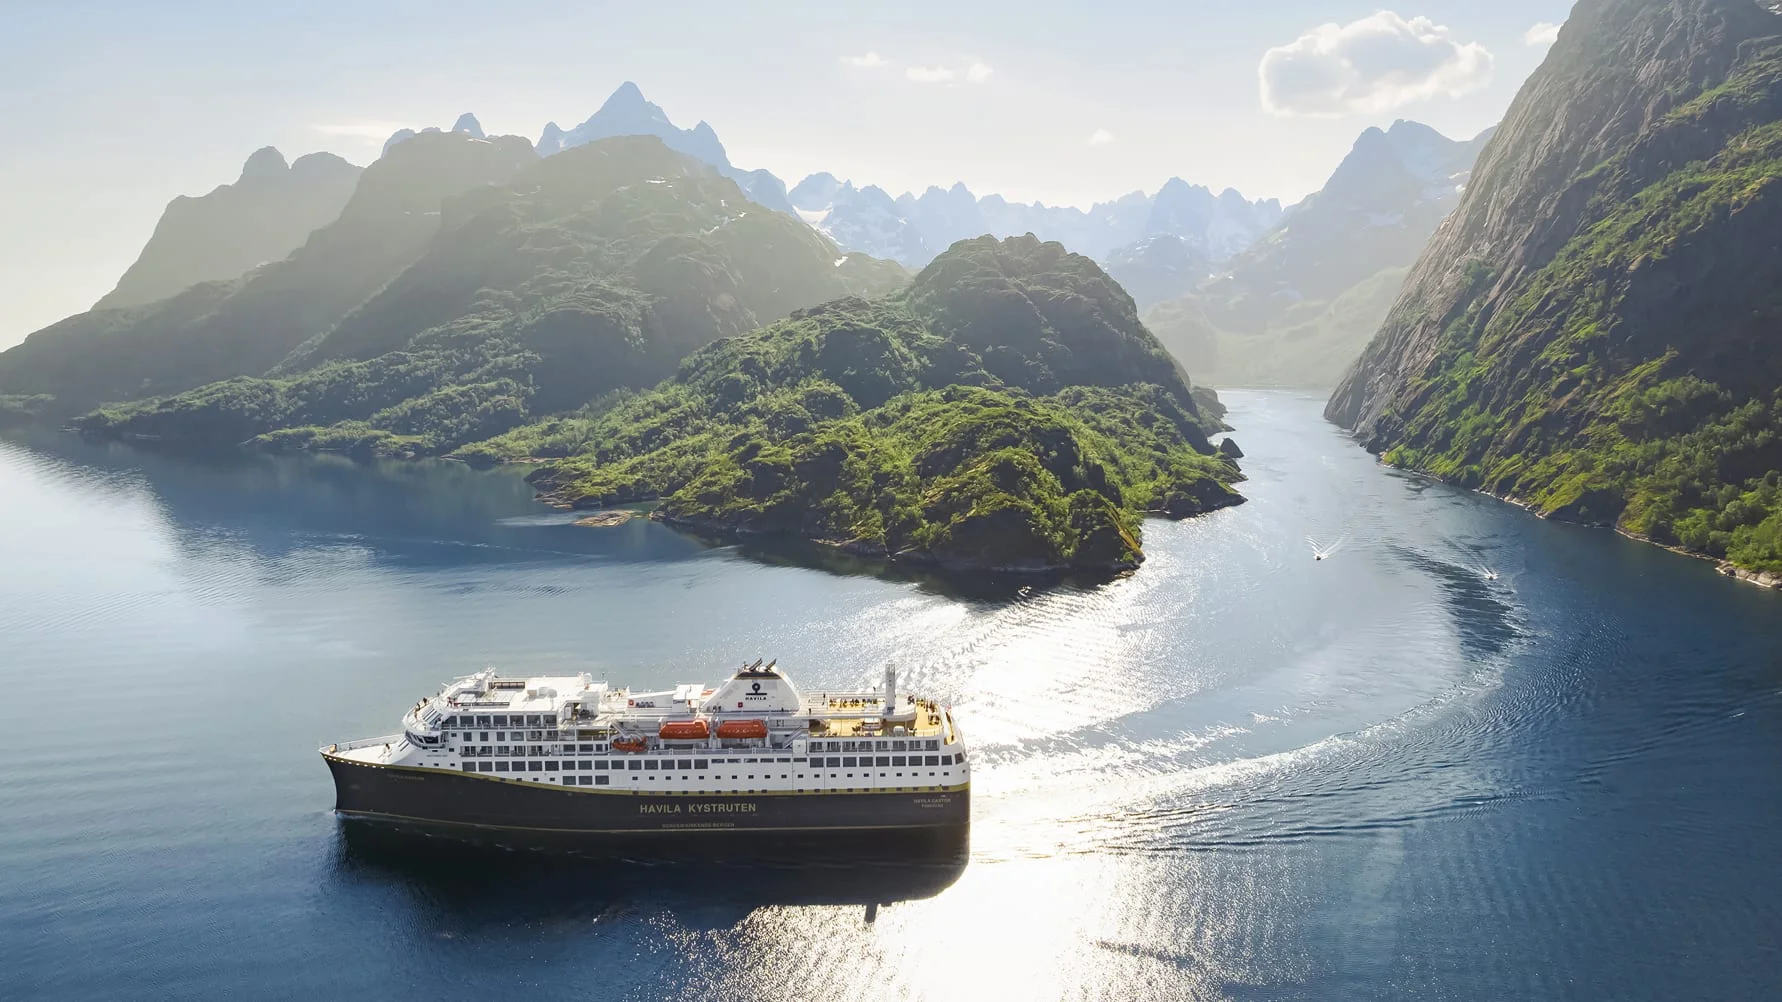 Havila Voyages ship in a Norway fjord.